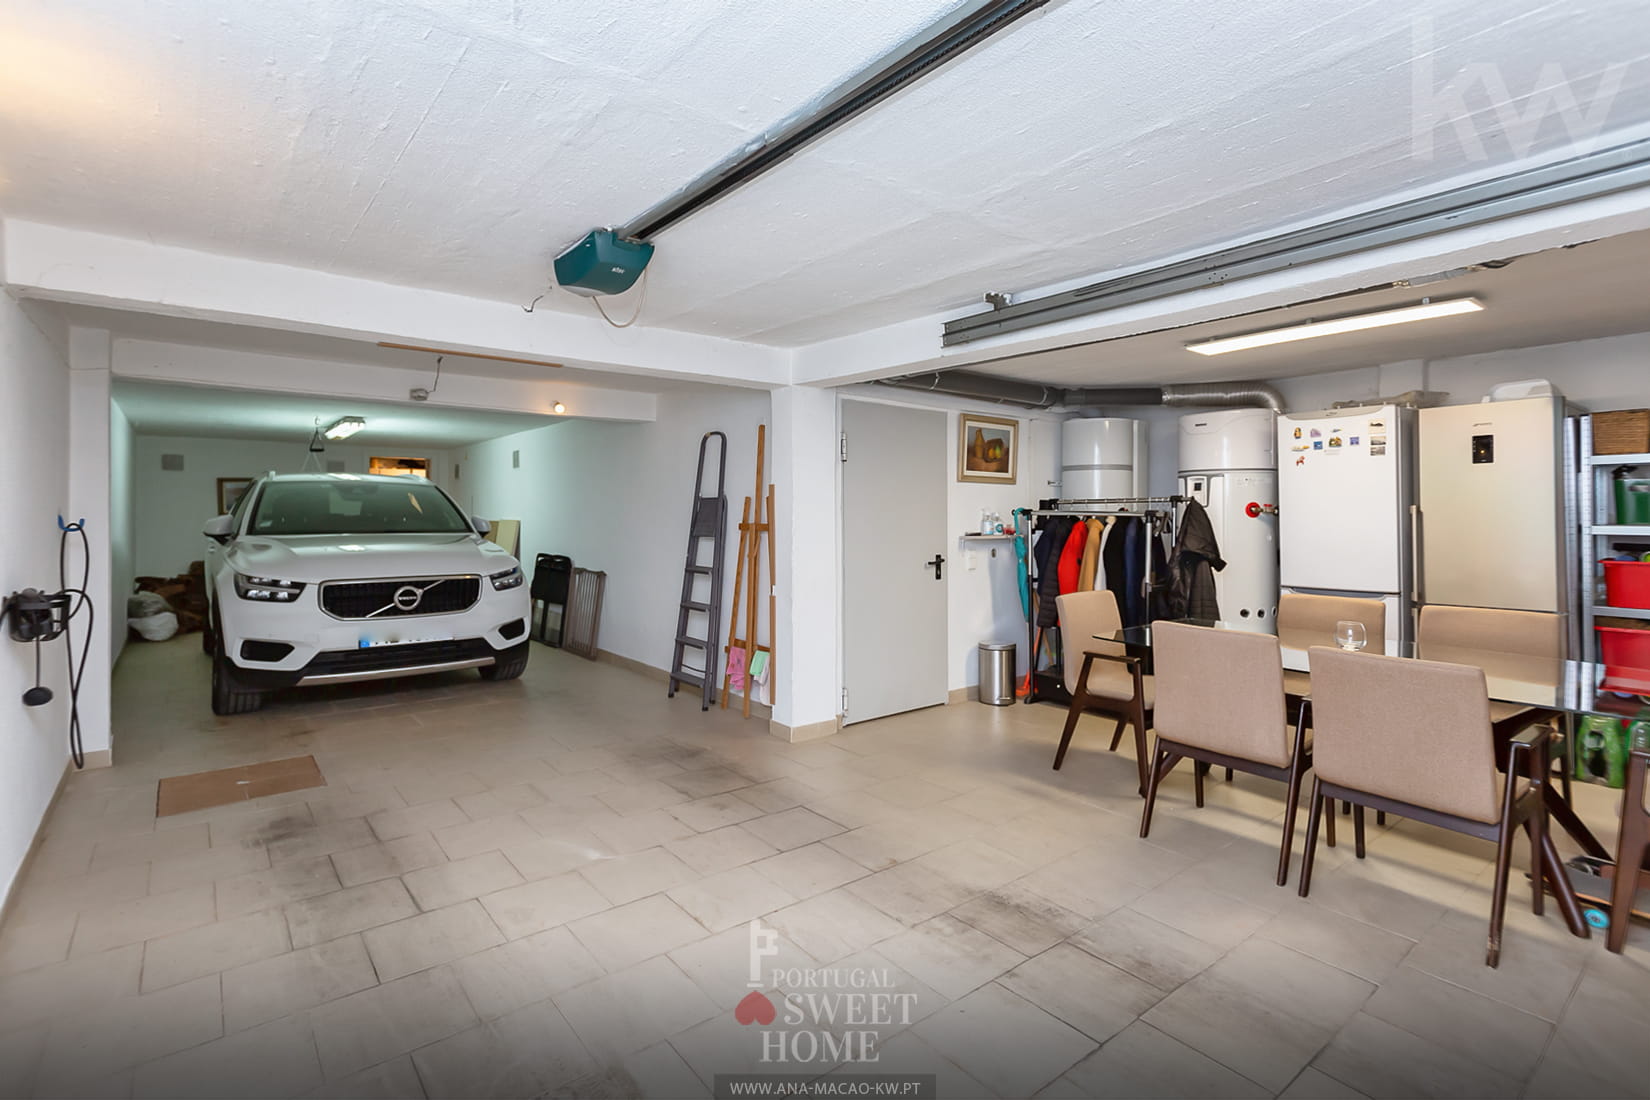 Garage (53 m²) with space for 2 vehicles